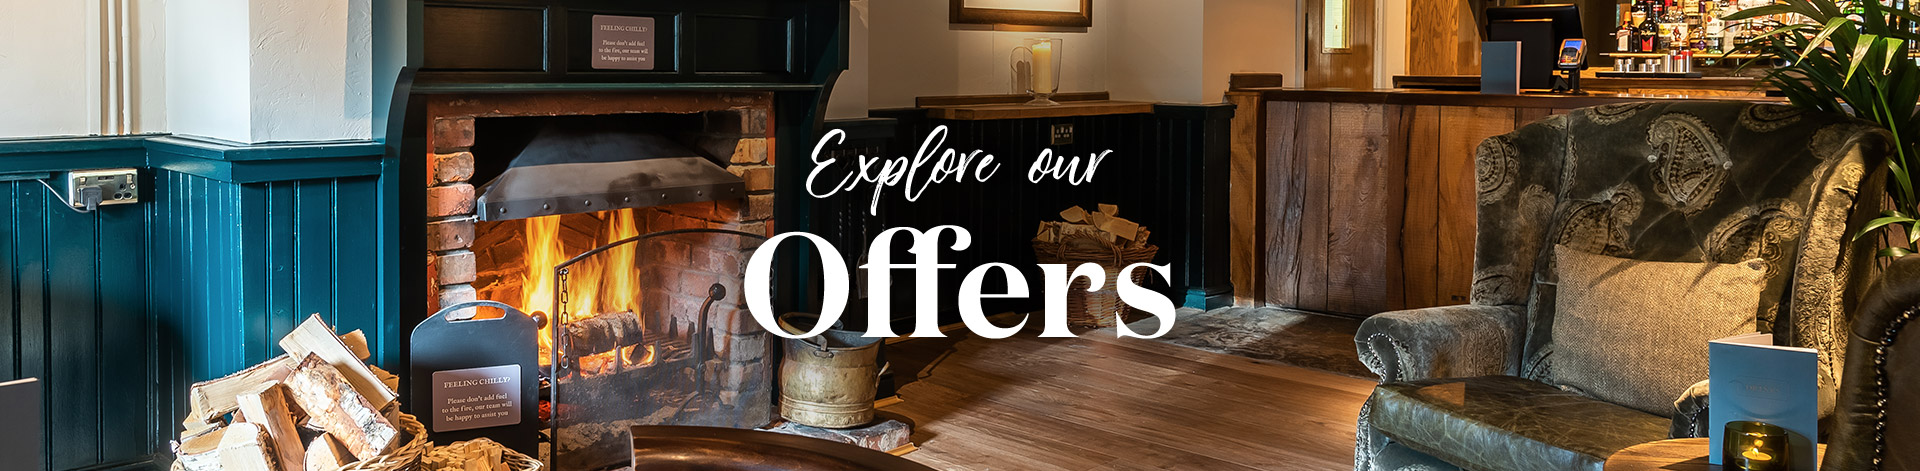 Our latest offers at The Falcon's Nest